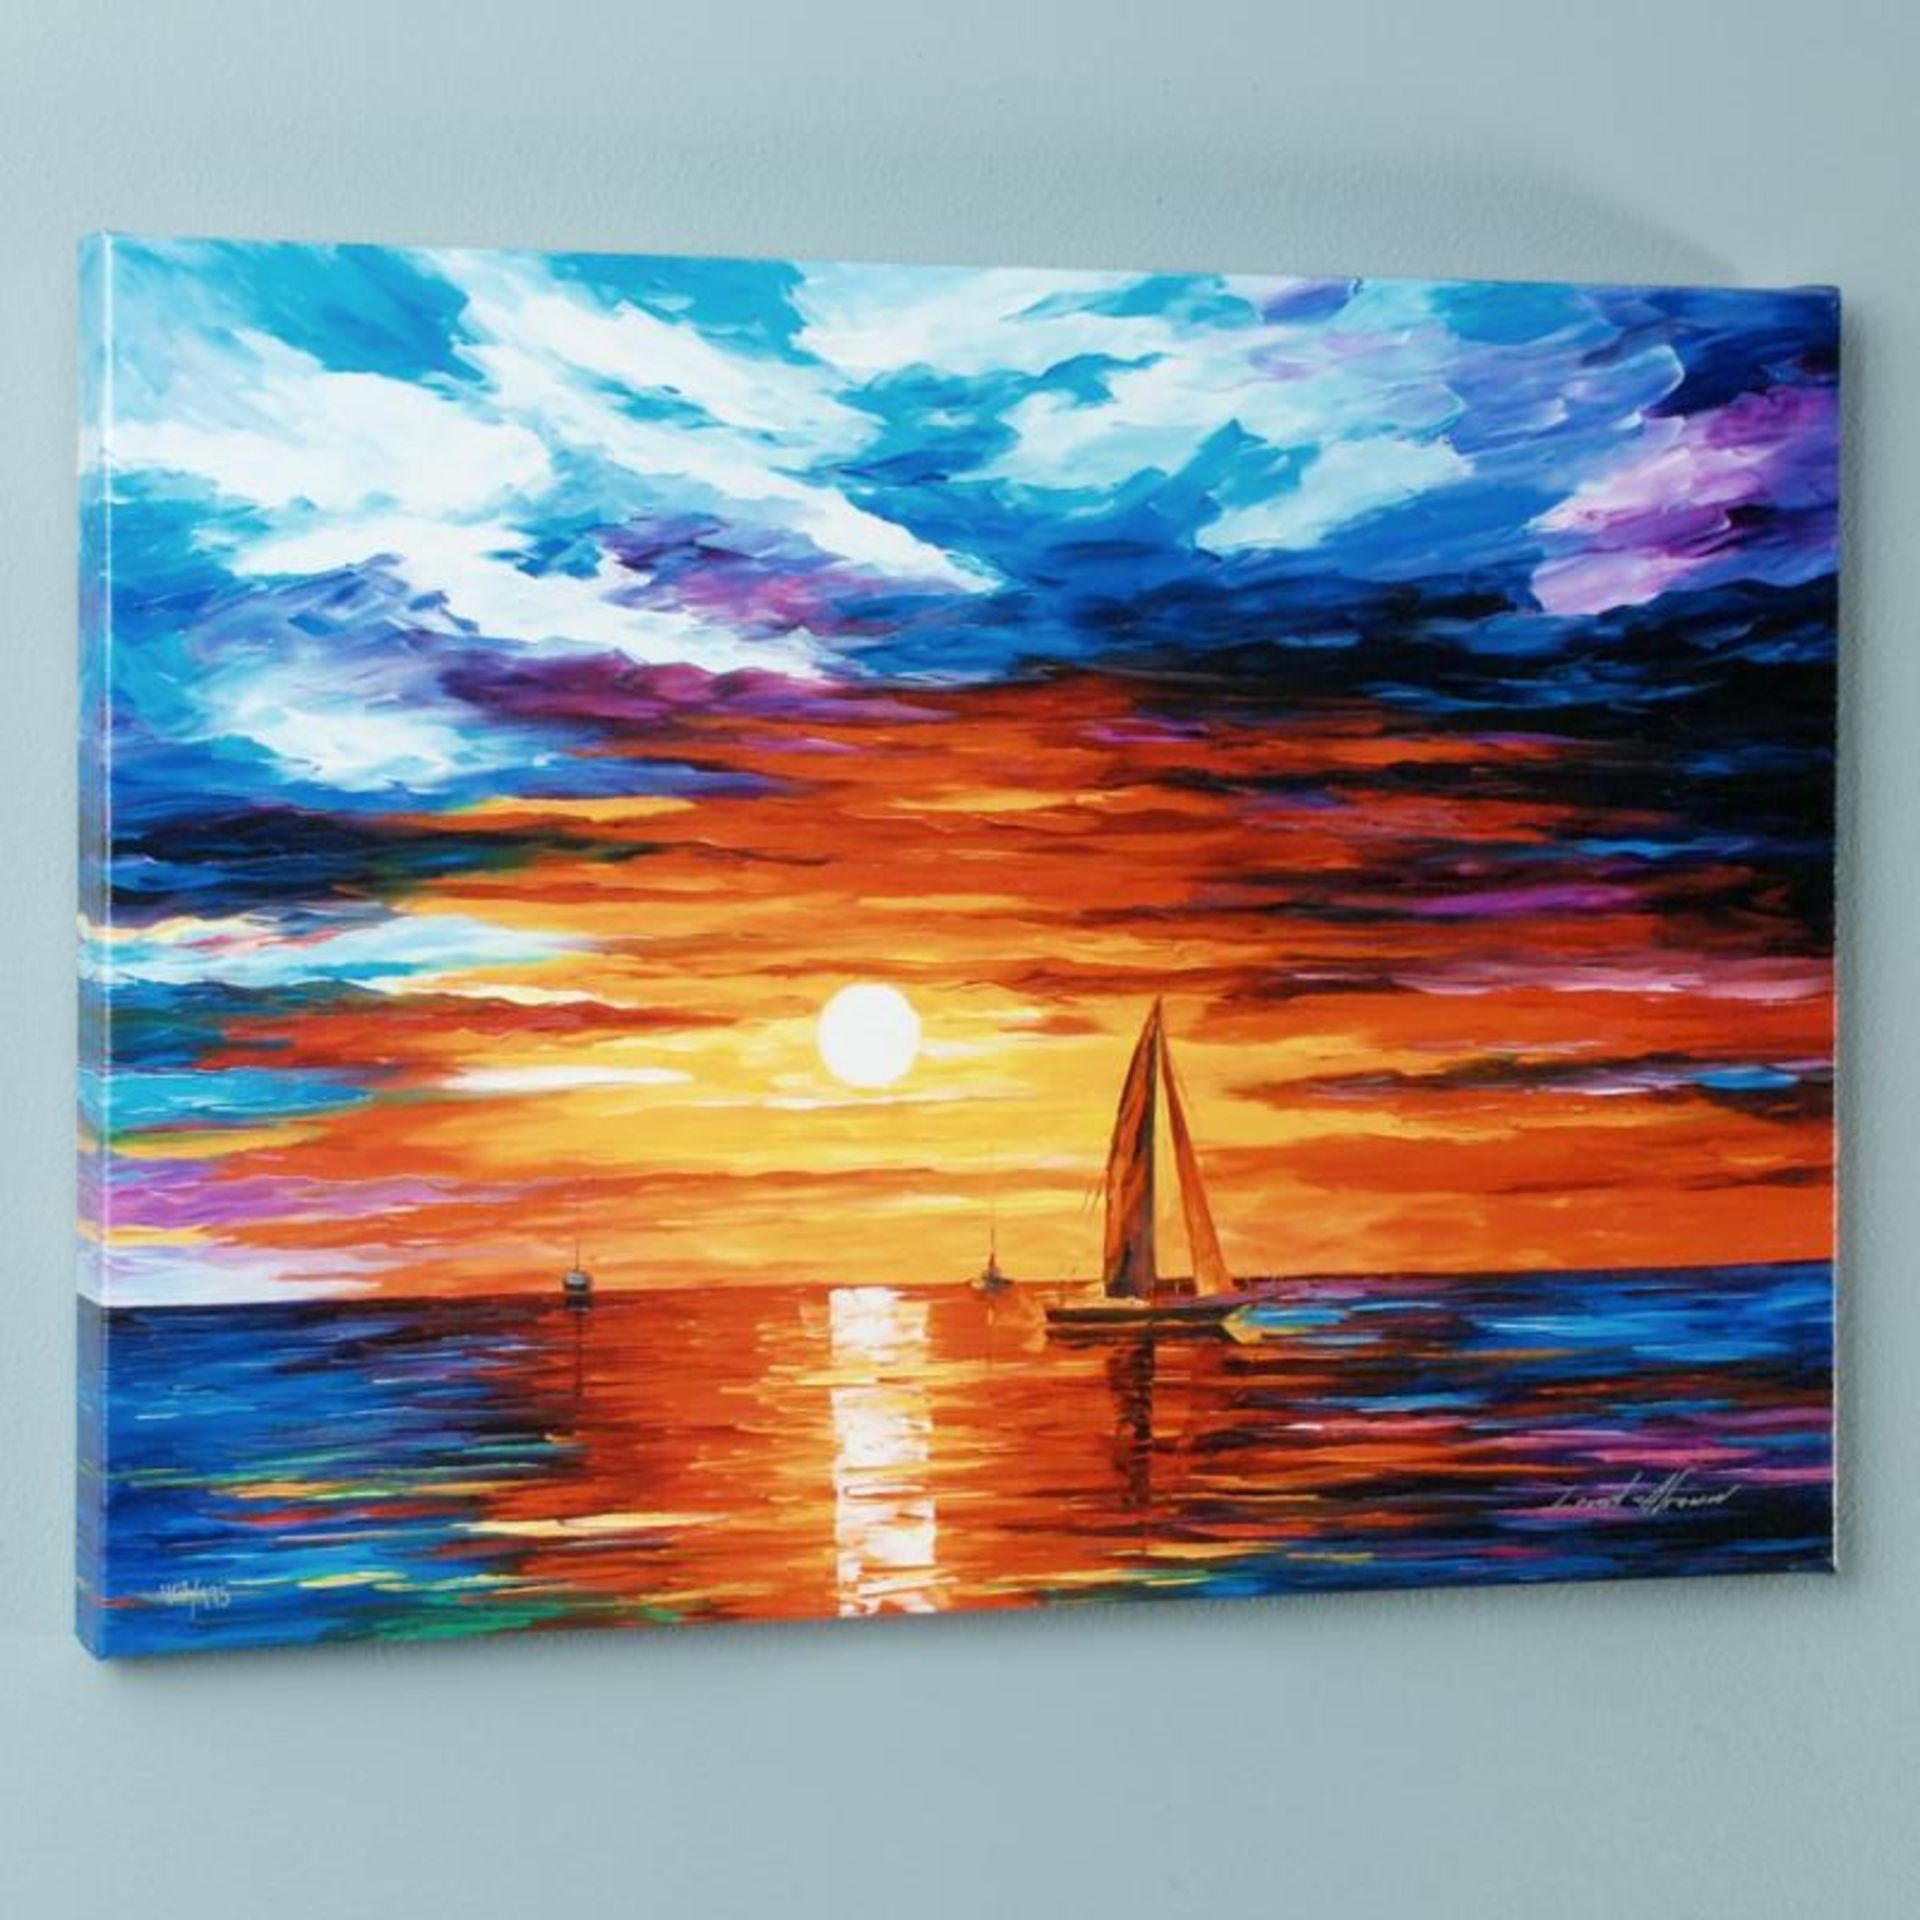 Touch of Horizon by Afremov (1955-2019) - Image 3 of 3